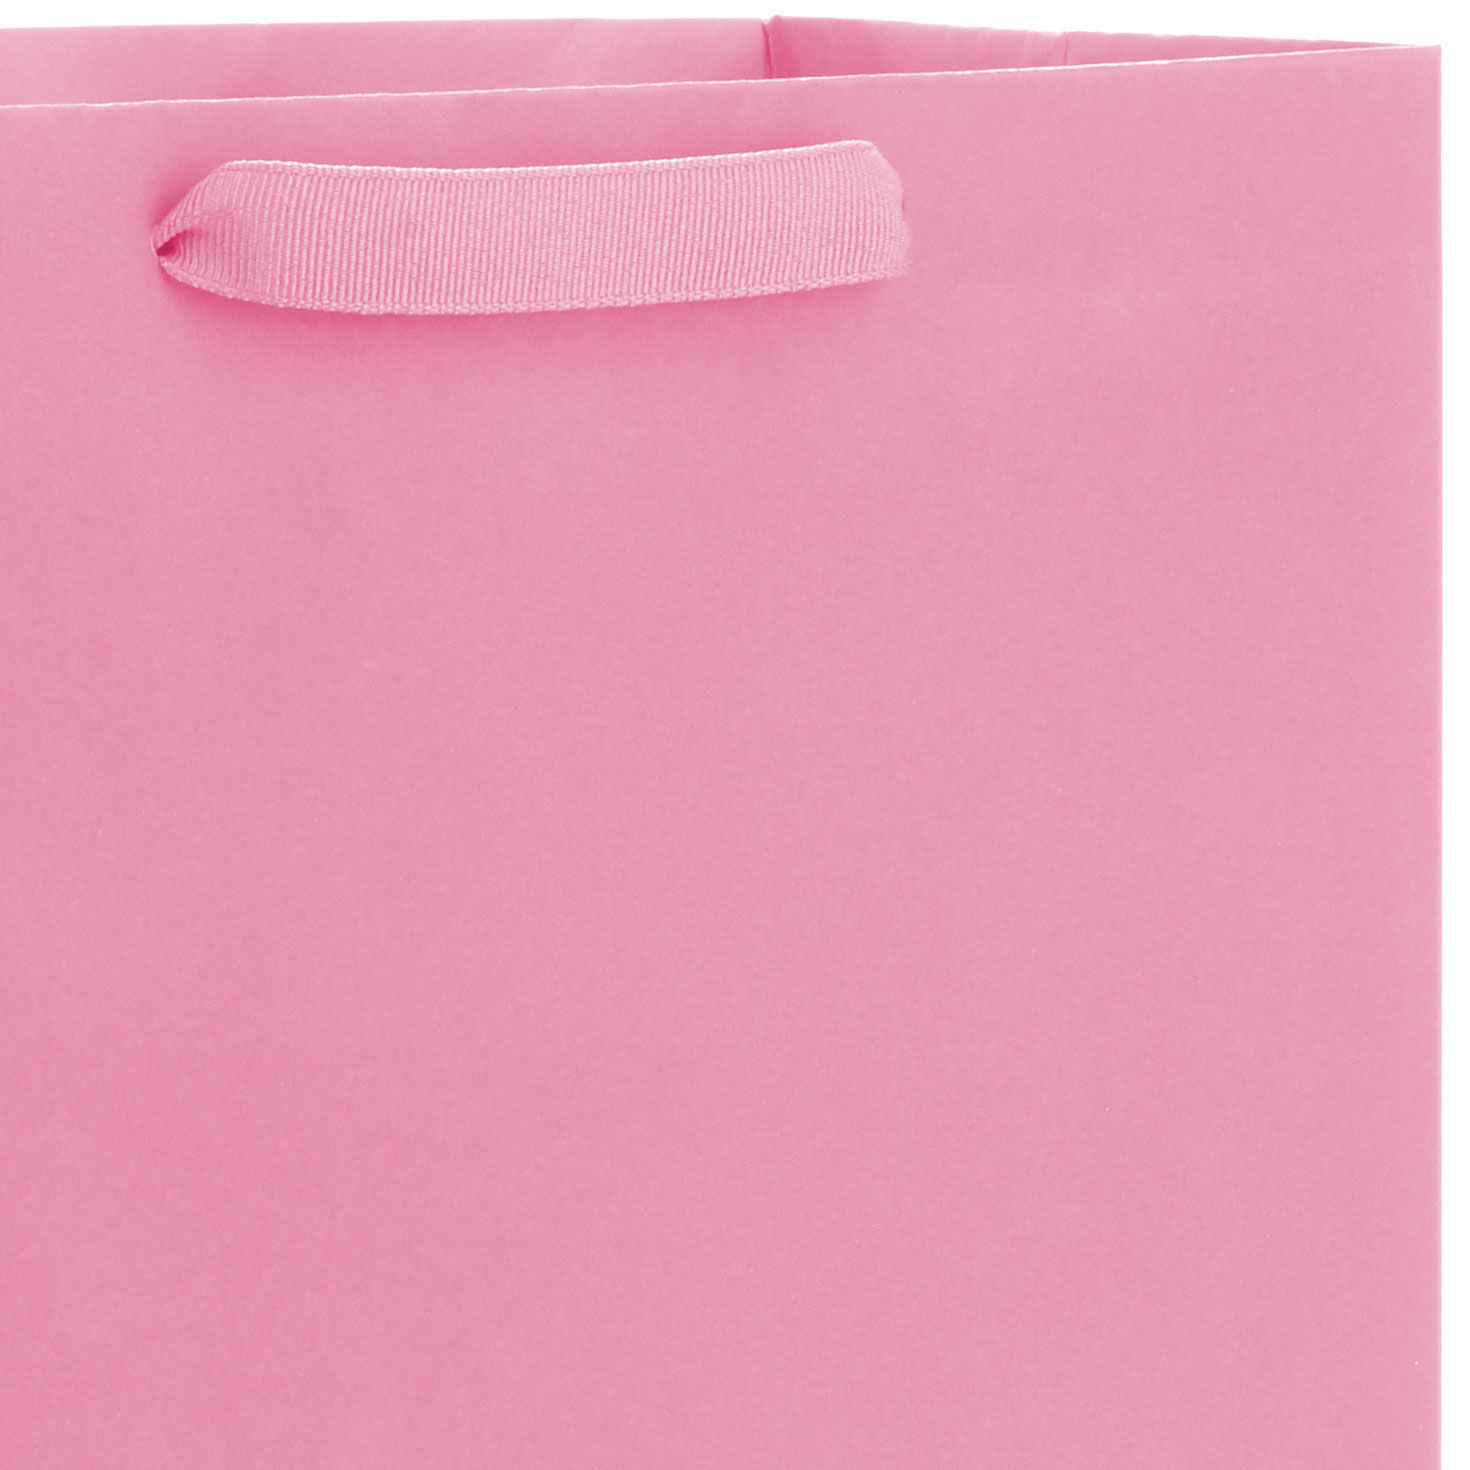 13" Pink Large Gift Bag for only USD 4.49 | Hallmark